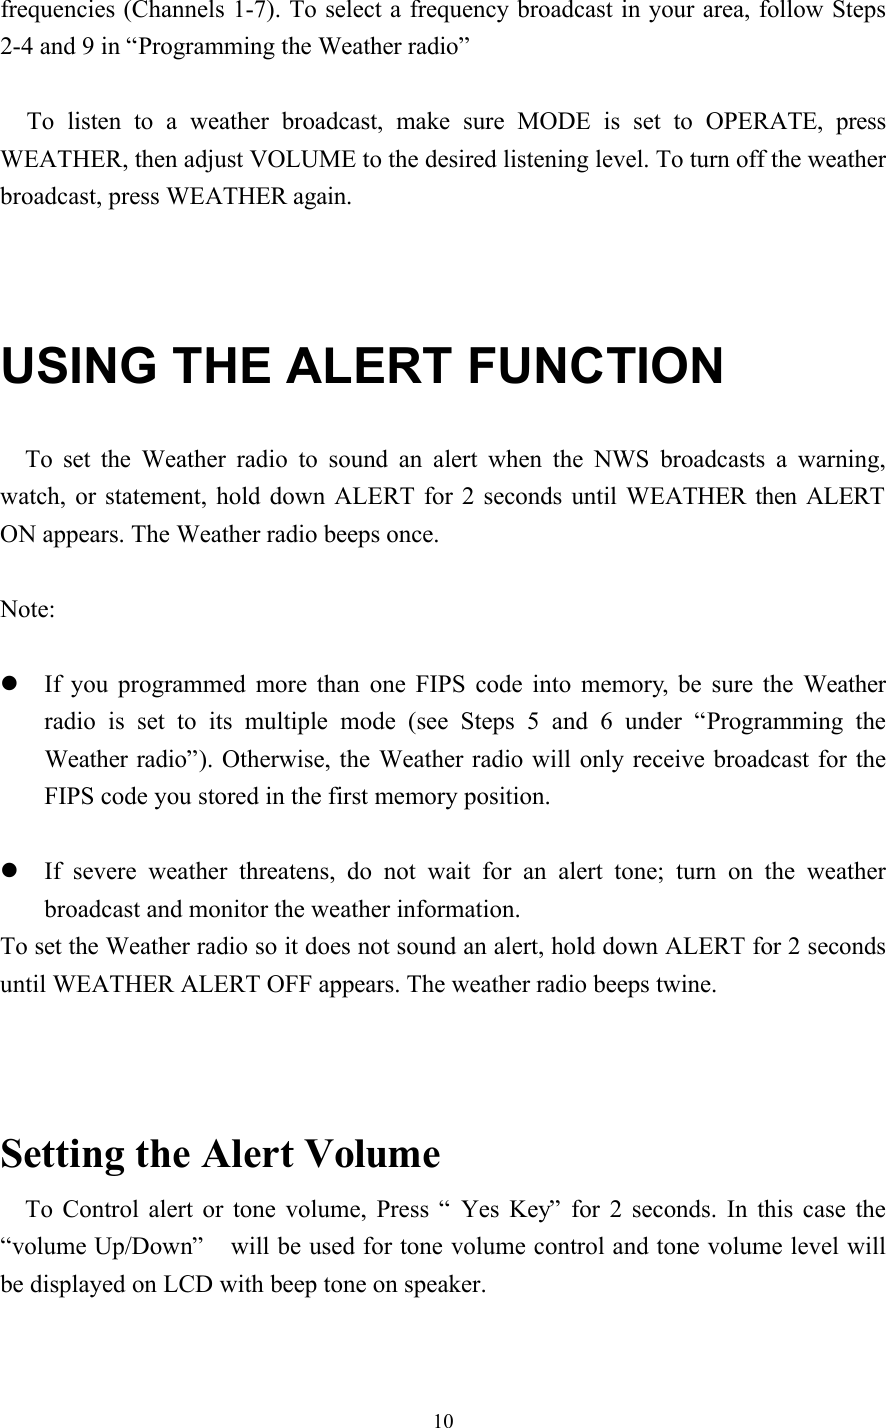 10frequencies (Channels 1-7). To select a frequency broadcast in your area, follow Steps2-4 and 9 in “Programming the Weather radio”To listen to a weather broadcast, make sure MODE is set to OPERATE, pressWEATHER, then adjust VOLUME to the desired listening level. To turn off the weatherbroadcast, press WEATHER again.USING THE ALERT FUNCTIONTo set the Weather radio to sound an alert when the NWS broadcasts a warning,watch, or statement, hold down ALERT for 2 seconds until WEATHER then ALERTON appears. The Weather radio beeps once.Note:l If you programmed more than one FIPS code into memory, be sure the Weatherradio is set to its multiple mode (see Steps 5 and 6 under  “Programming theWeather radio”). Otherwise, the Weather radio will only receive broadcast for theFIPS code you stored in the first memory position.l If severe weather threatens, do not wait for an alert tone; turn on the weatherbroadcast and monitor the weather information.To set the Weather radio so it does not sound an alert, hold down ALERT for 2 secondsuntil WEATHER ALERT OFF appears. The weather radio beeps twine.Setting the Alert VolumeTo Control alert or tone volume, Press “ Yes Key” for 2 seconds. In this case the“volume Up/Down”  will be used for tone volume control and tone volume level willbe displayed on LCD with beep tone on speaker.